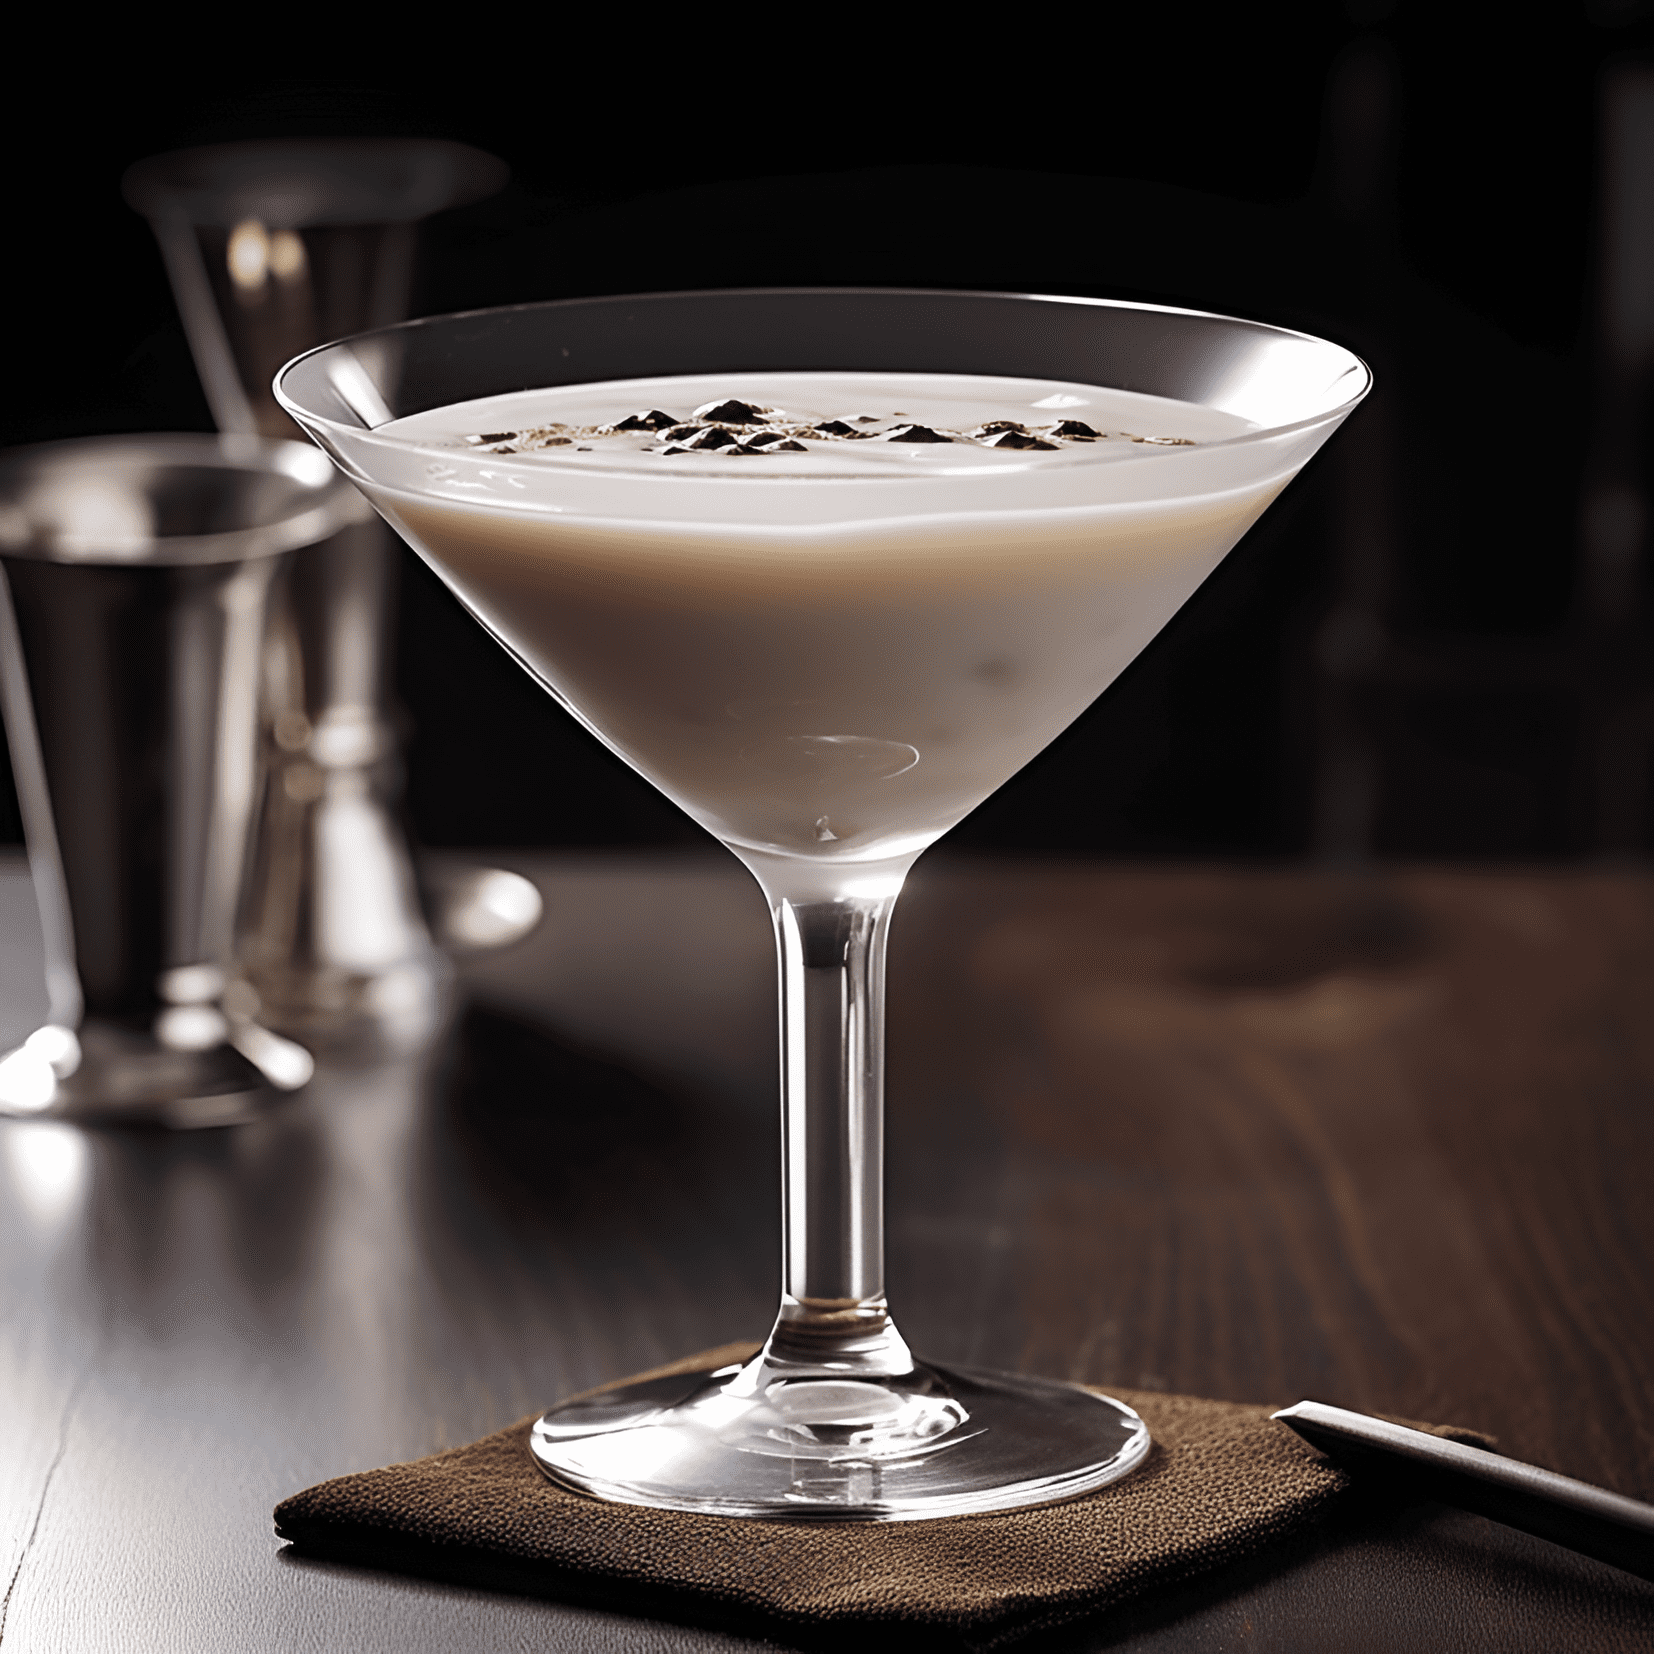 White Cargo Cocktail Recipe - The White Cargo cocktail is a sweet, creamy, and indulgent drink with a rich, velvety texture. It has a subtle hint of vanilla and a slight nutty undertone from the gin.